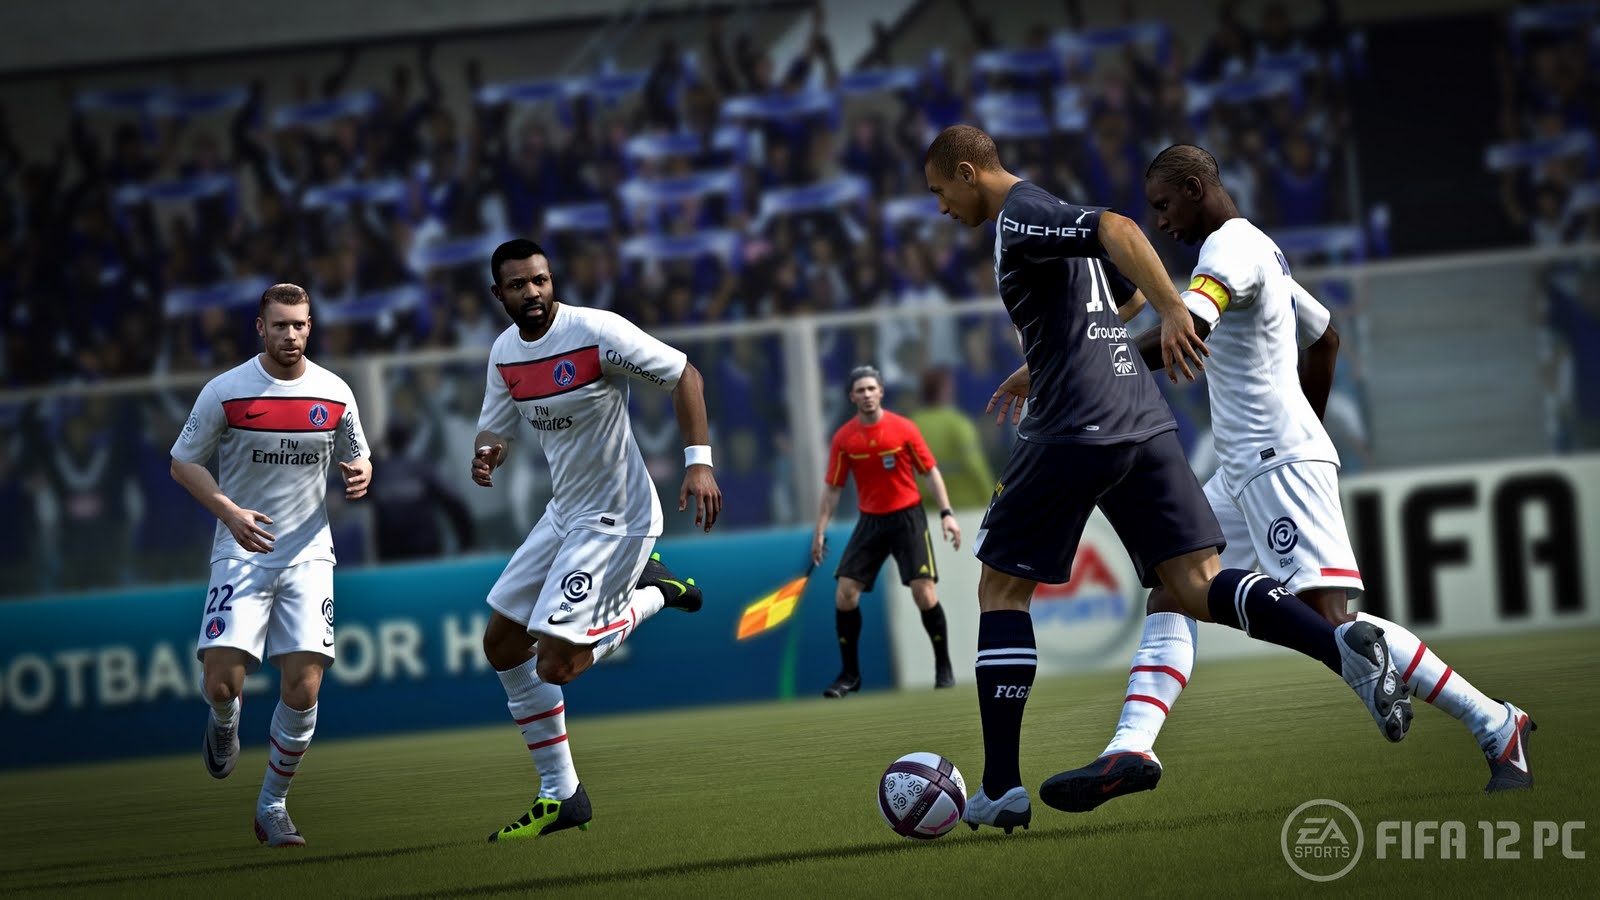 fifa 12 download for windows 10